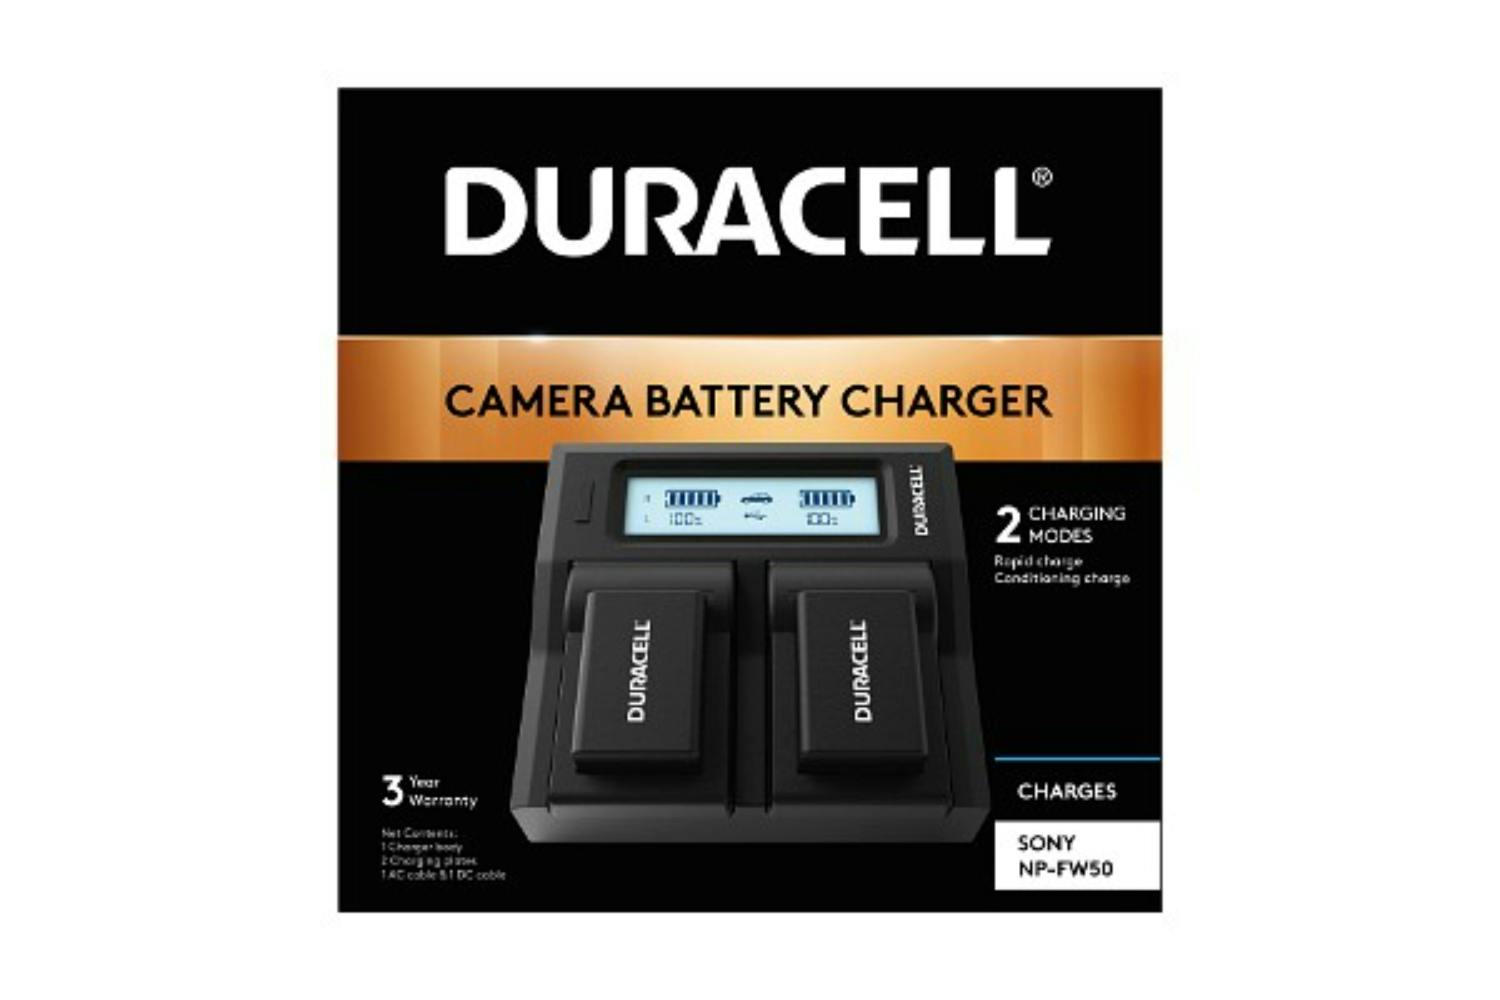 Duracell DRS6120 Dual Battery Charger for Sony NPFW50